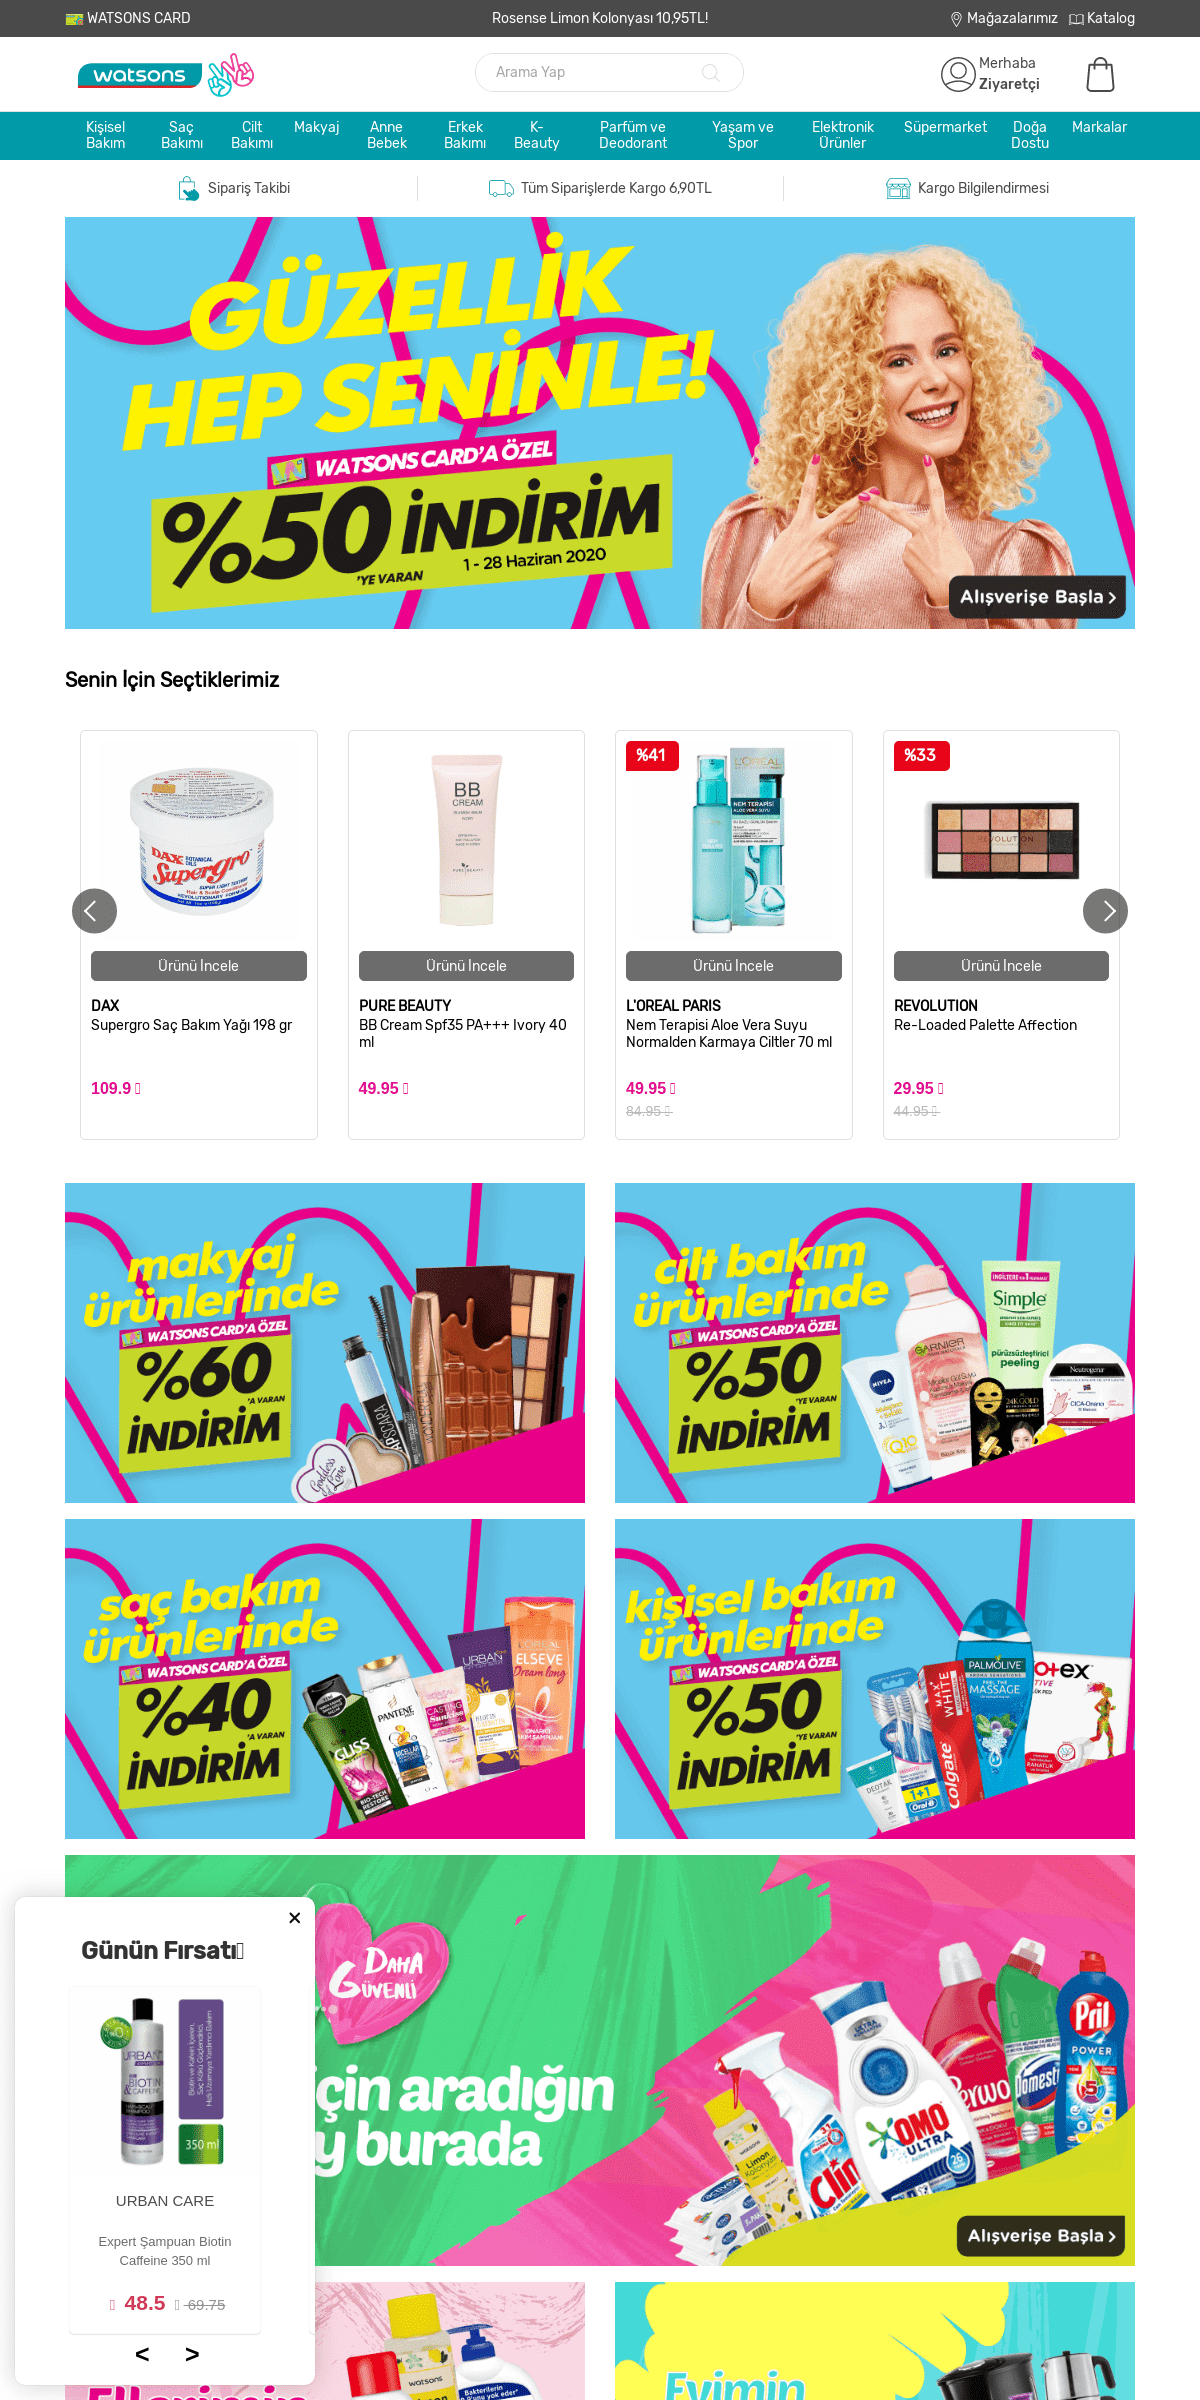 A complete backup of watsons.com.tr